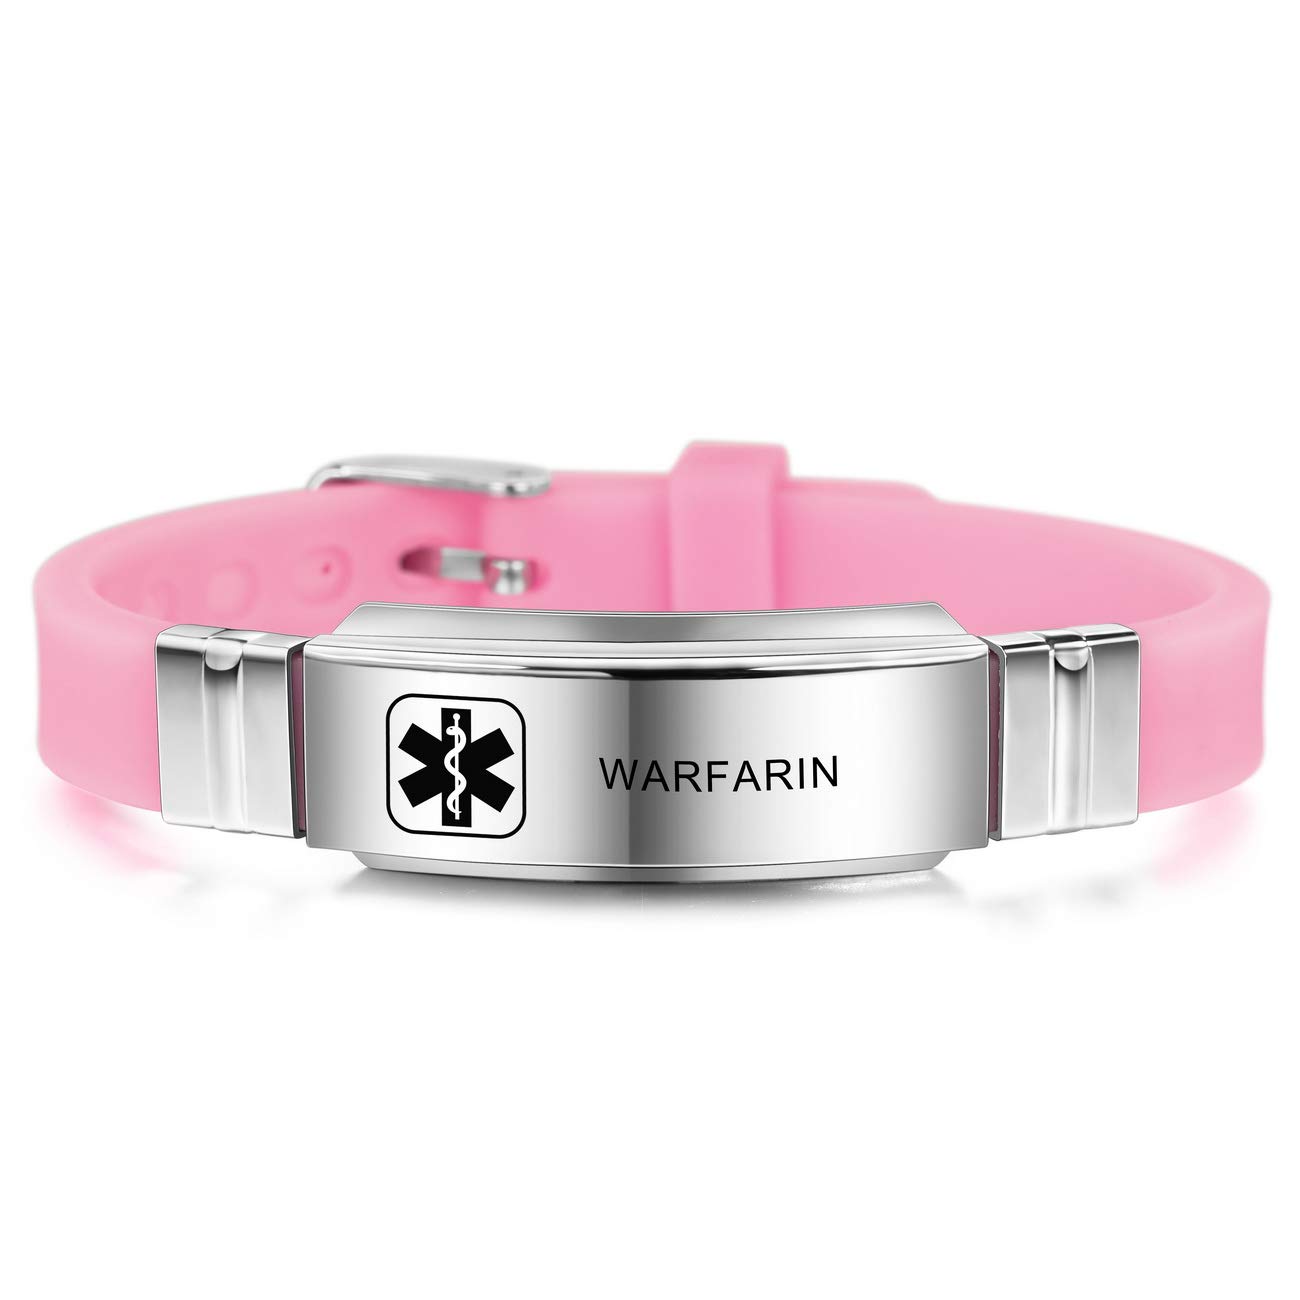 MOWOM Medical Bracelet Custom Engraved Silicone Adjustable Sport ID Identification Alert Stainless Steel - Bundle with Emergency Card, Holder (Pink, No Needle Or Bp This Arm)